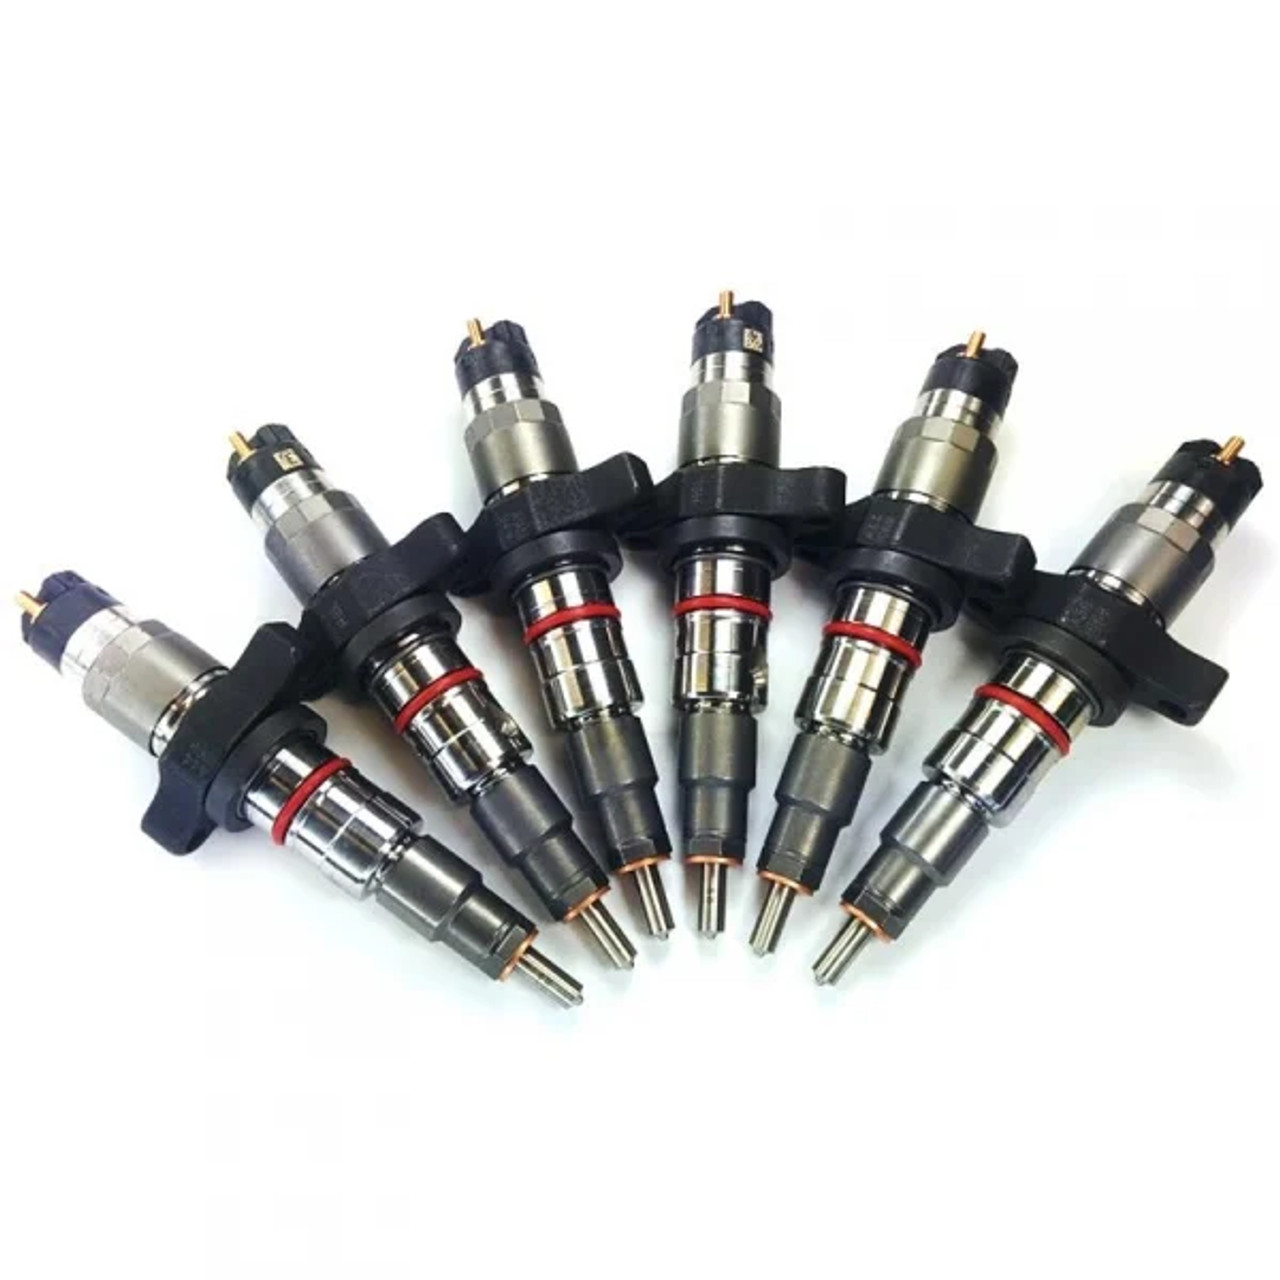 DDP NEW 50HP INJECTOR SET (15% OVER) 2004.5-2007 DODGE 5.9L CUMMINS (DDP N325-50)Complete View